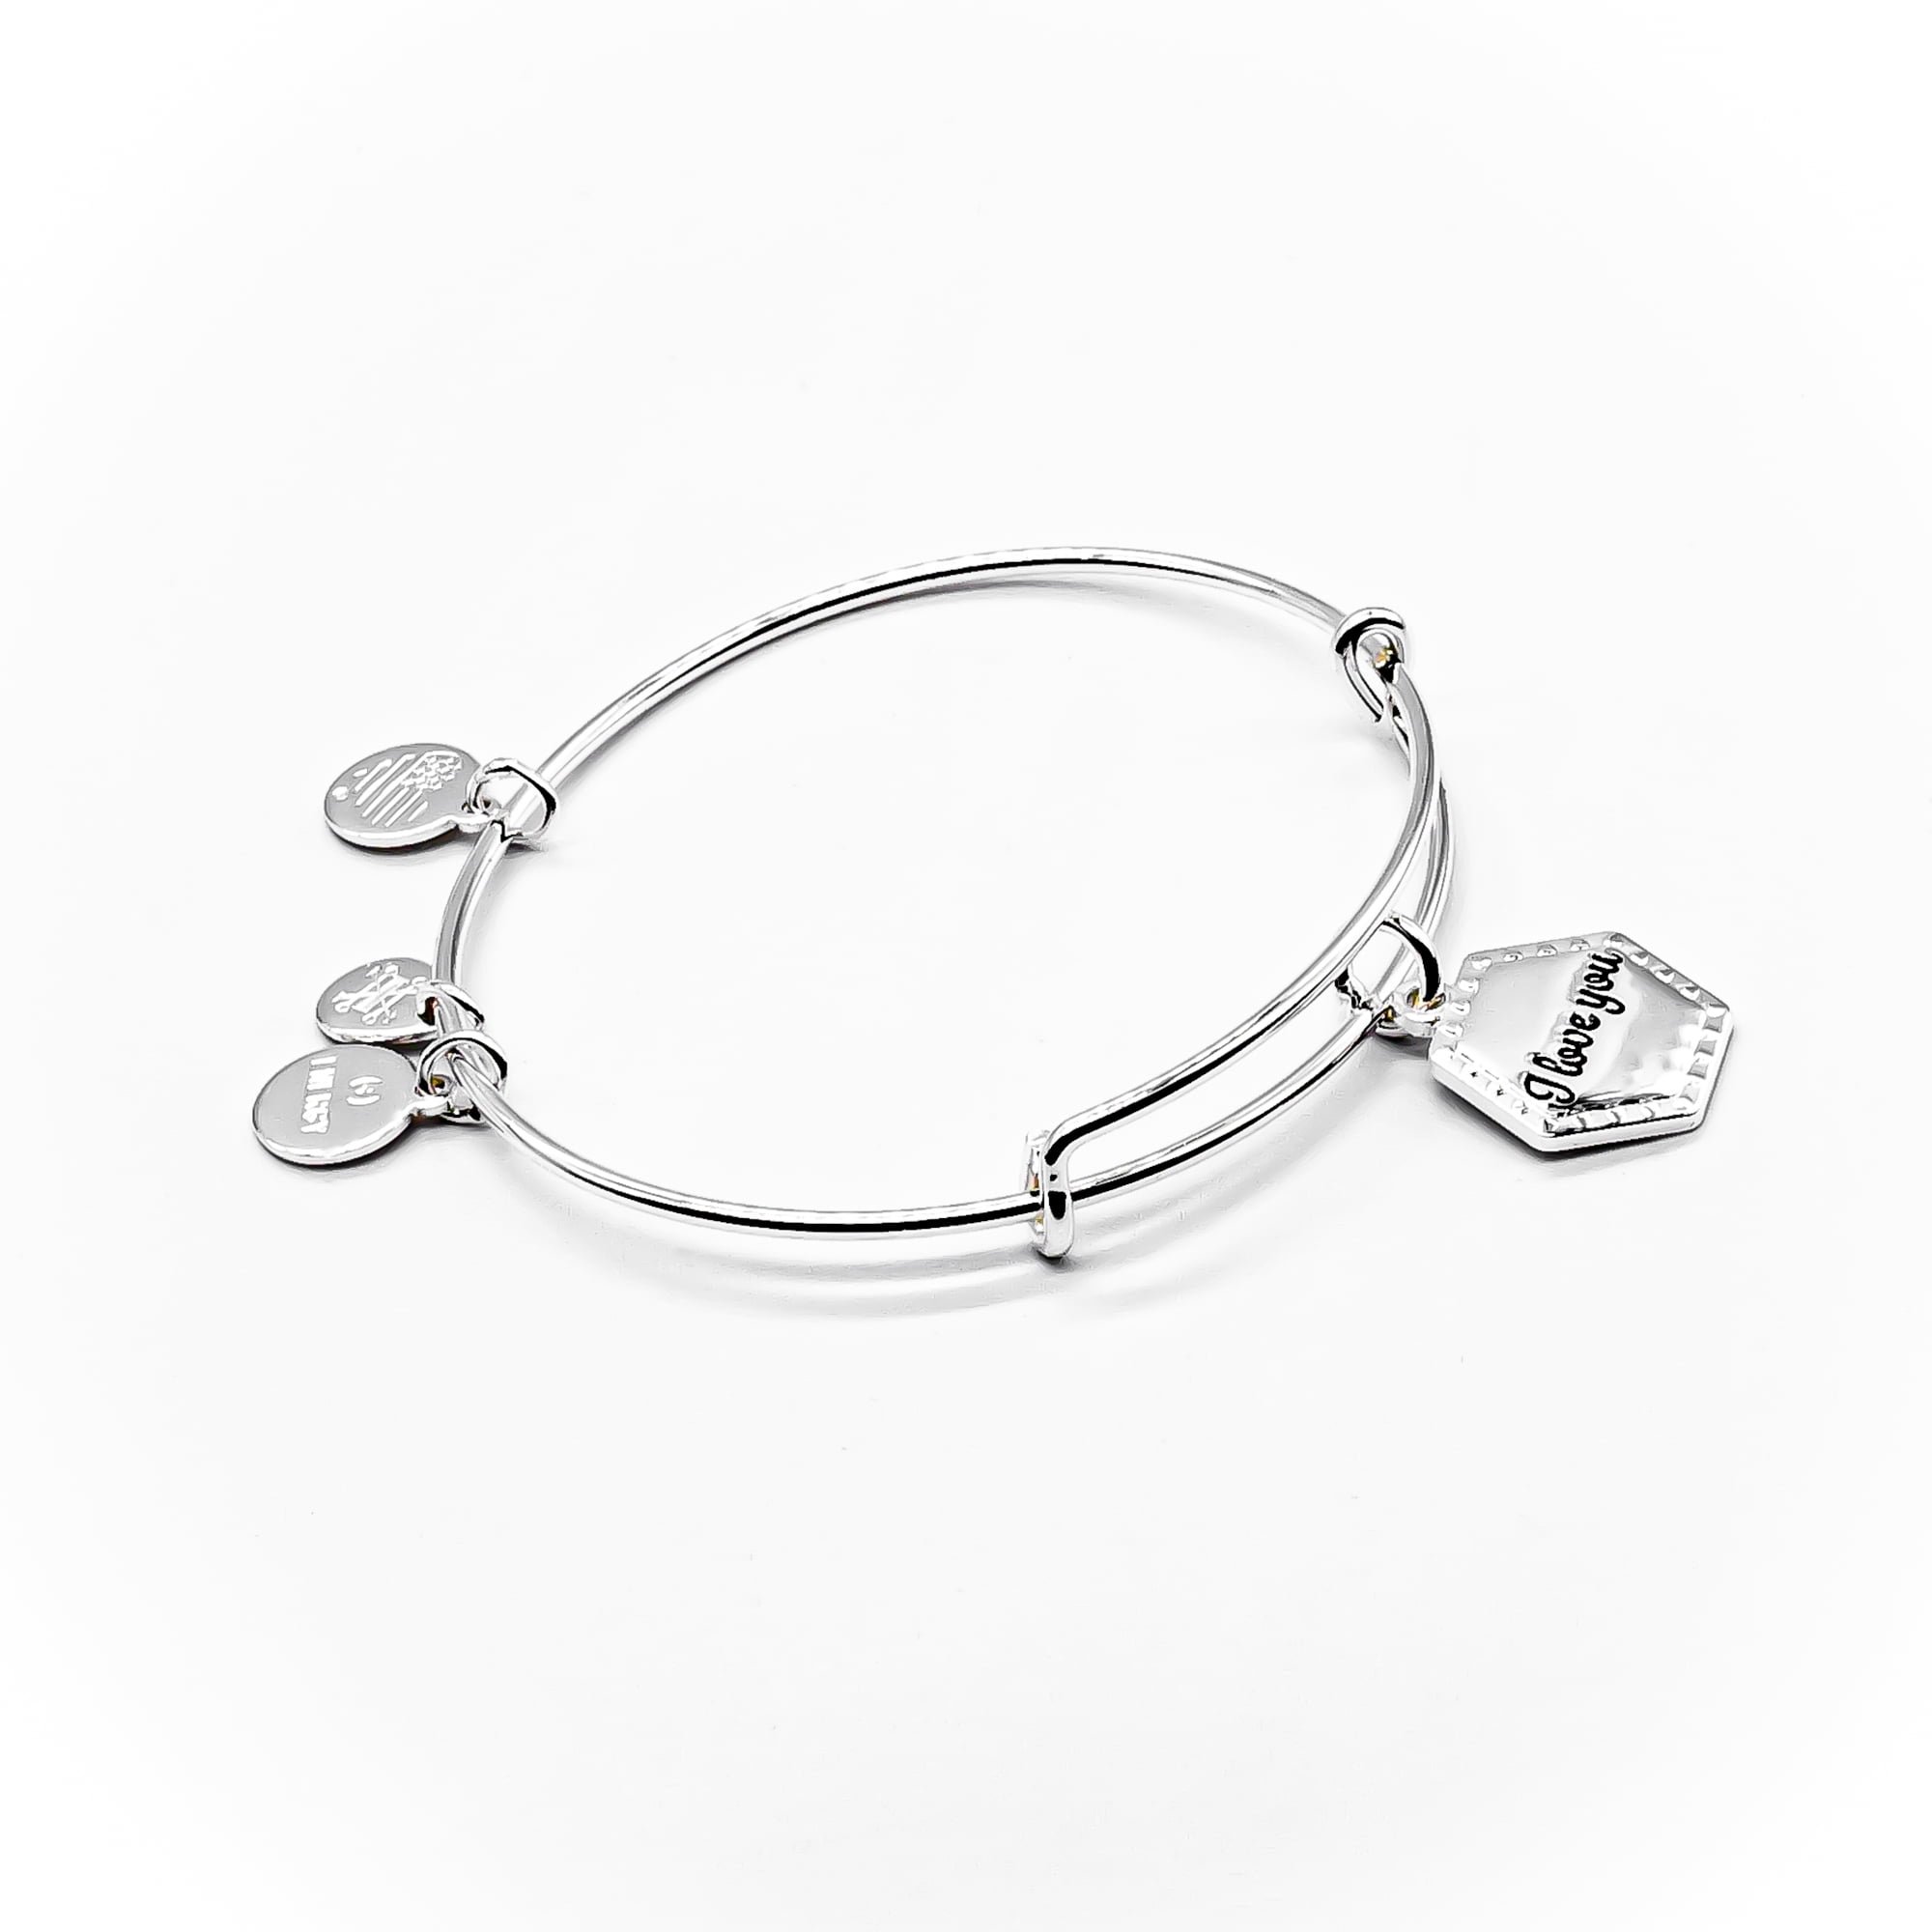 Romantic Adjustable Silver Charm Bangle Alloy Women Girl Jewelry Accessories 